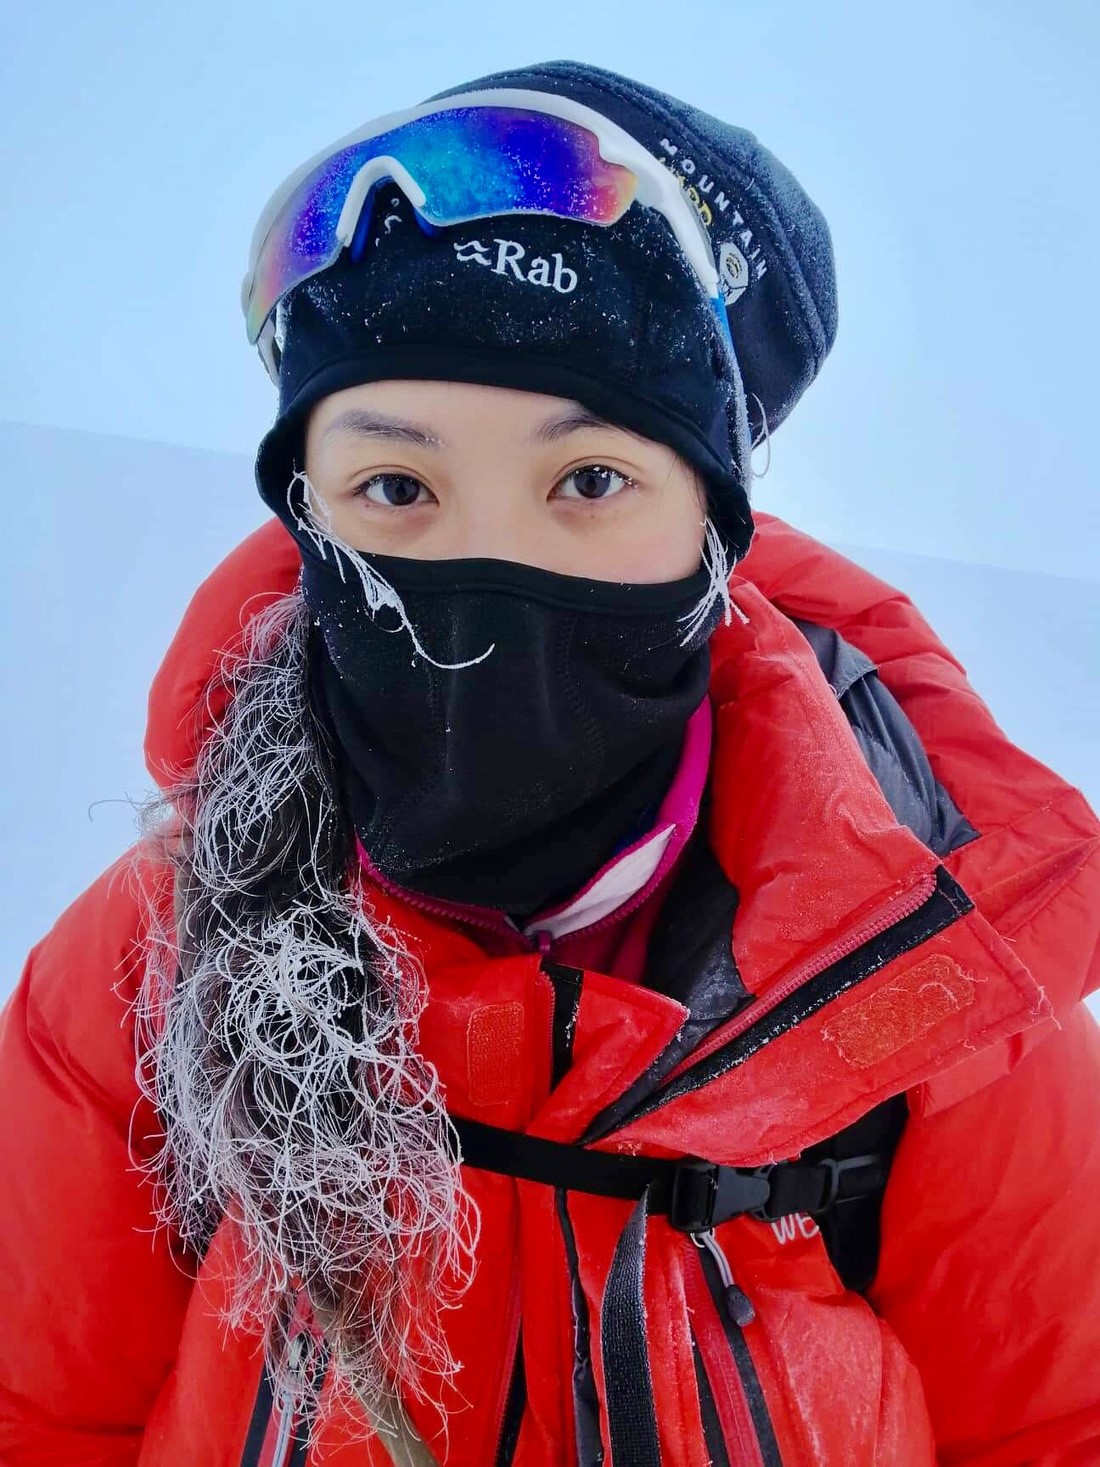 Céline Thanh Nha during her mountaineering journey. Photo: Supplied